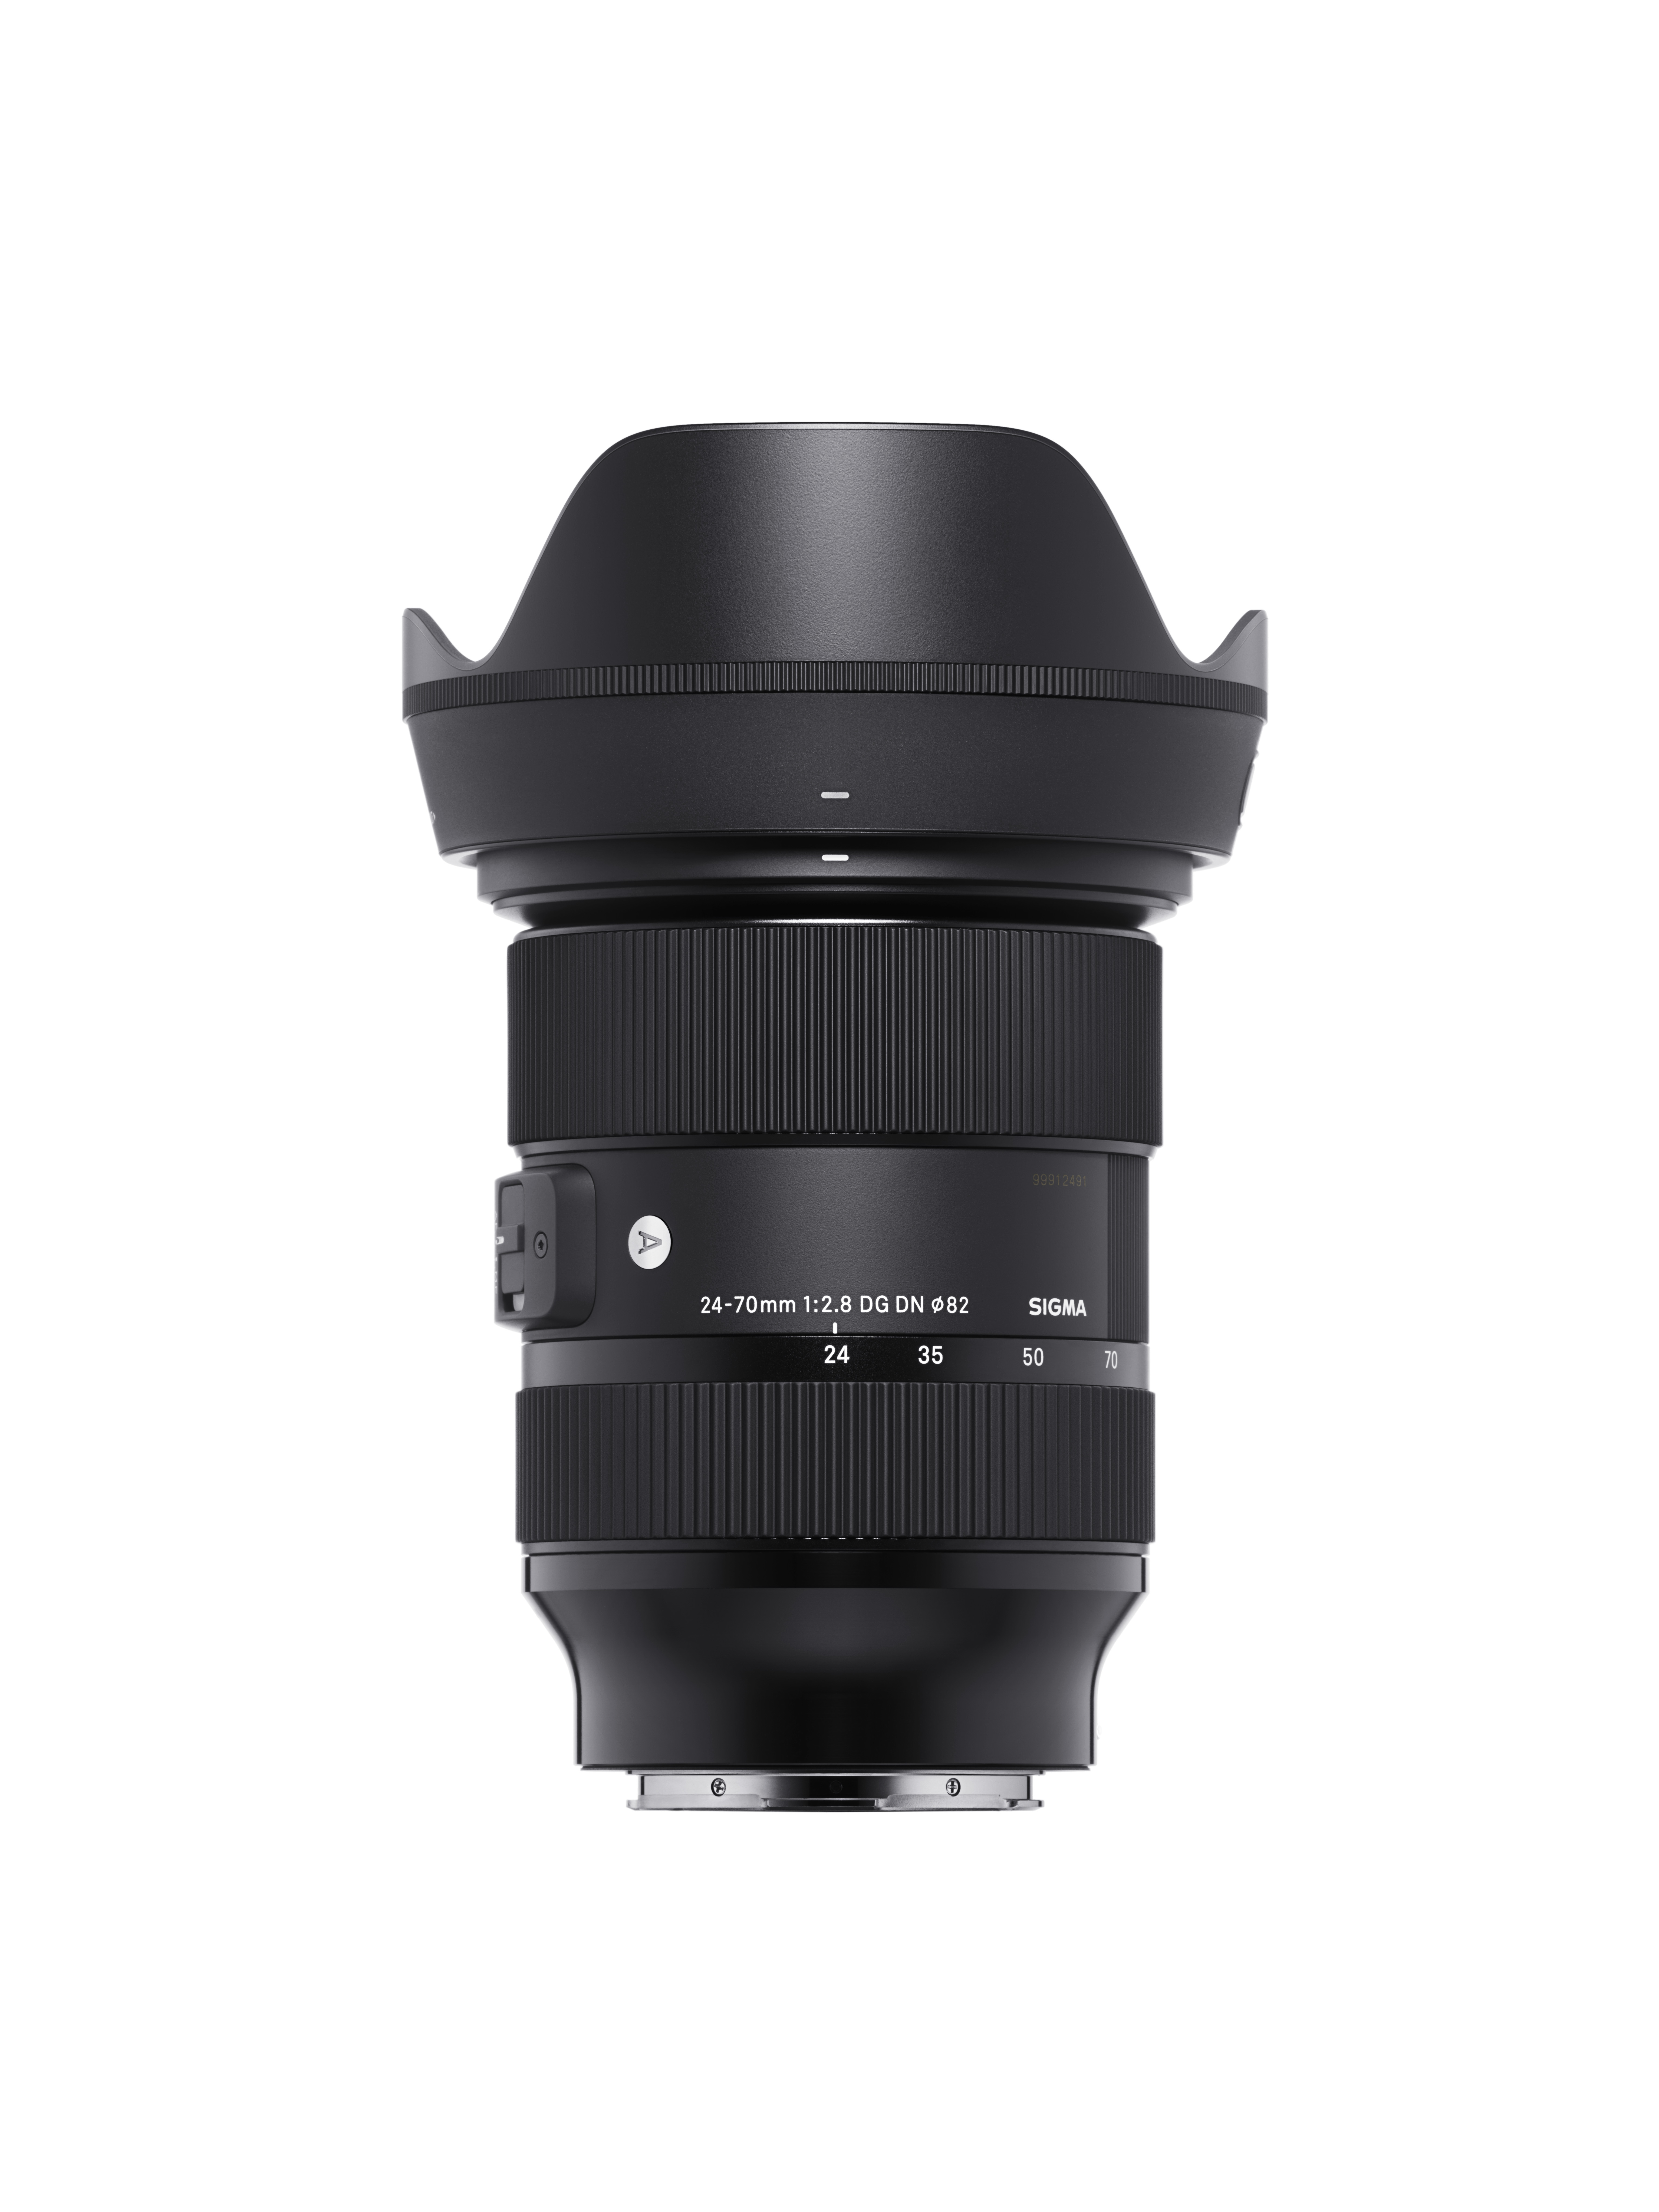 The Sigma 24-70mm F2.8 DG DN Art Is Real, and Here’s the Official Specs